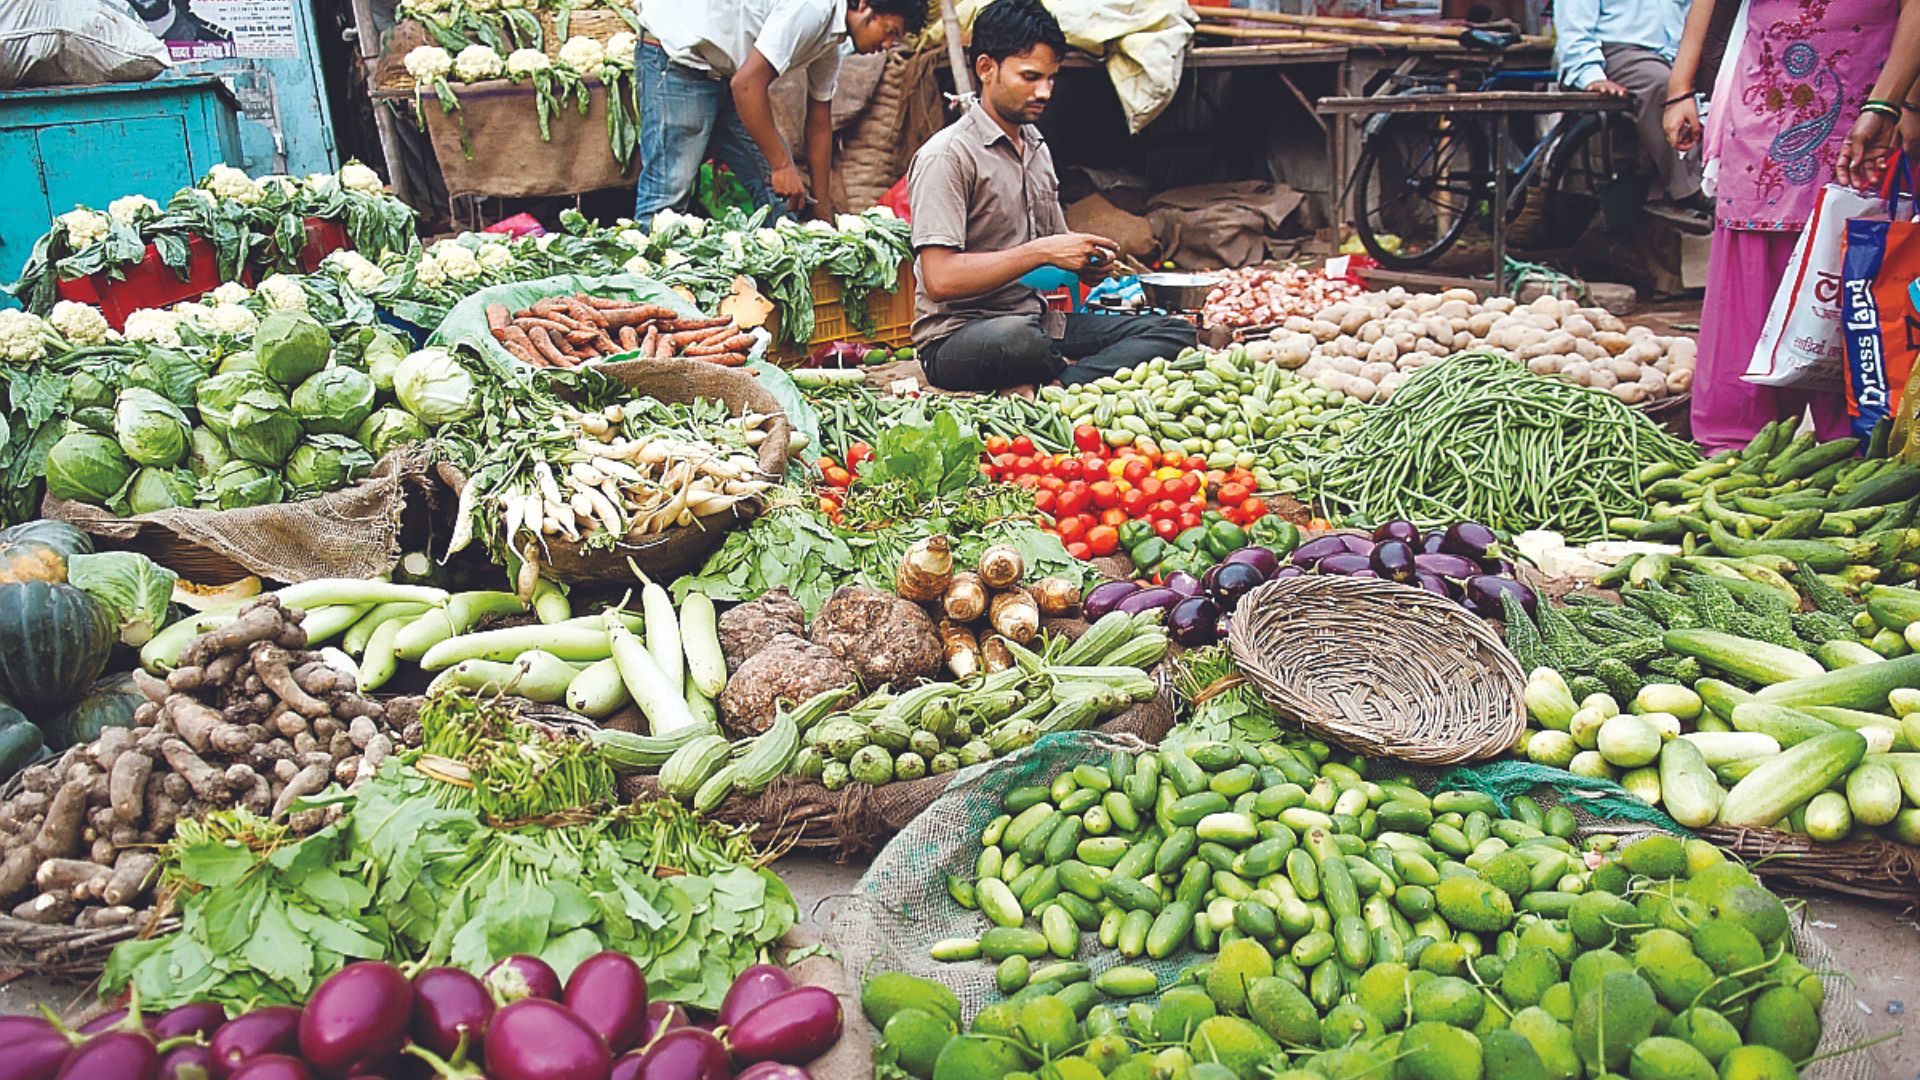 Driven by fuel and power, WPI inflation up 1.26% in April